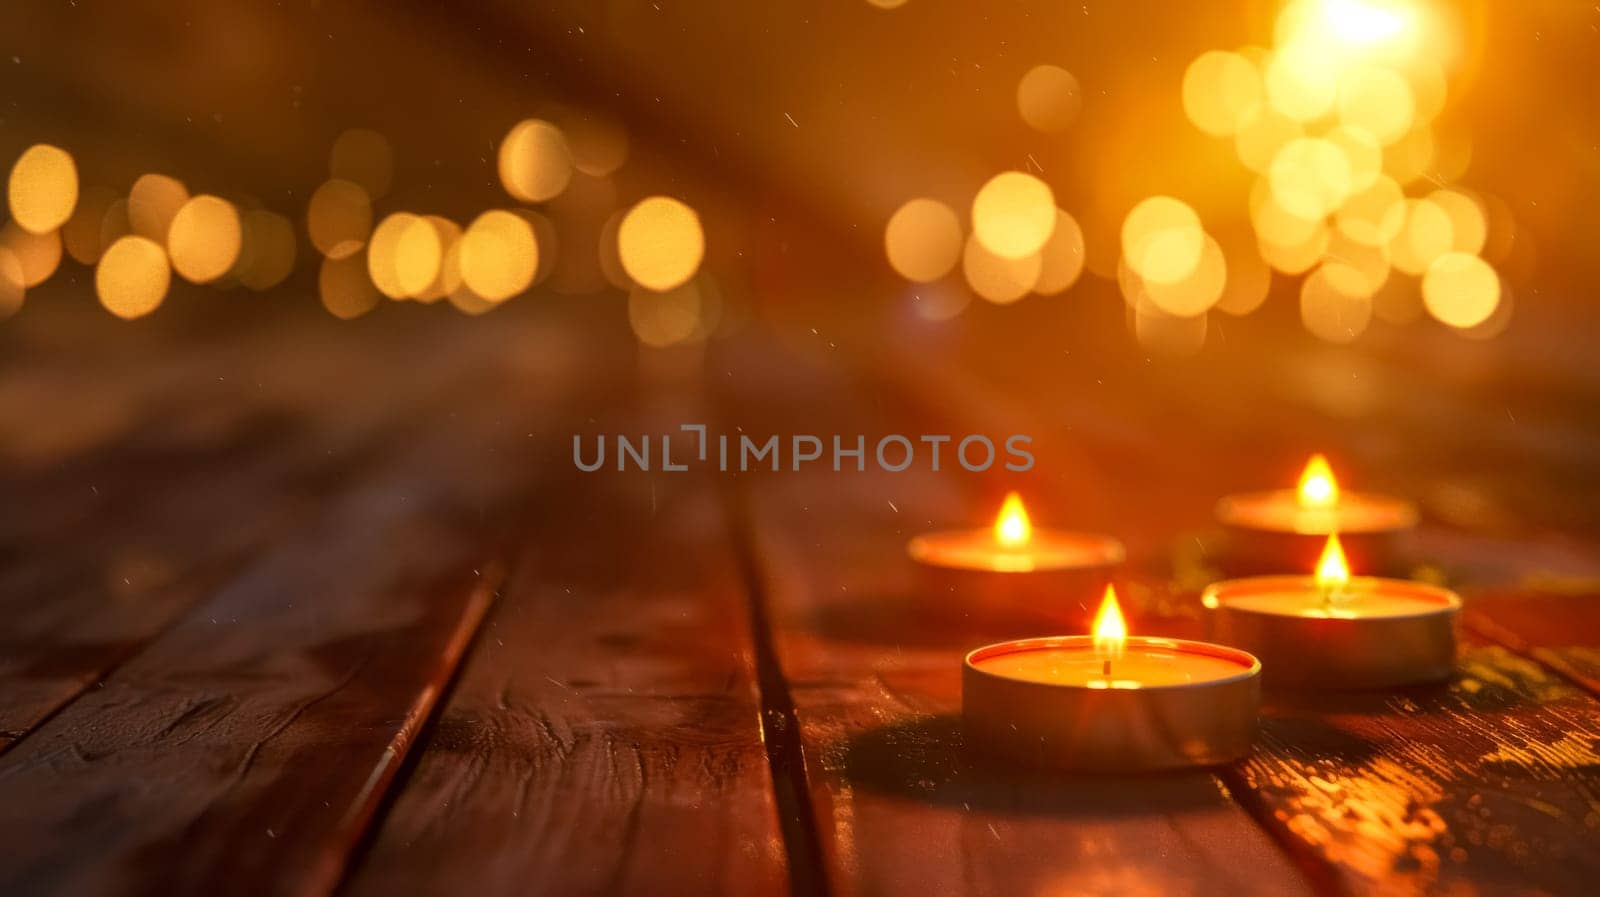 Cozy ambiance with tealight candles illuminating a rustic wood surface